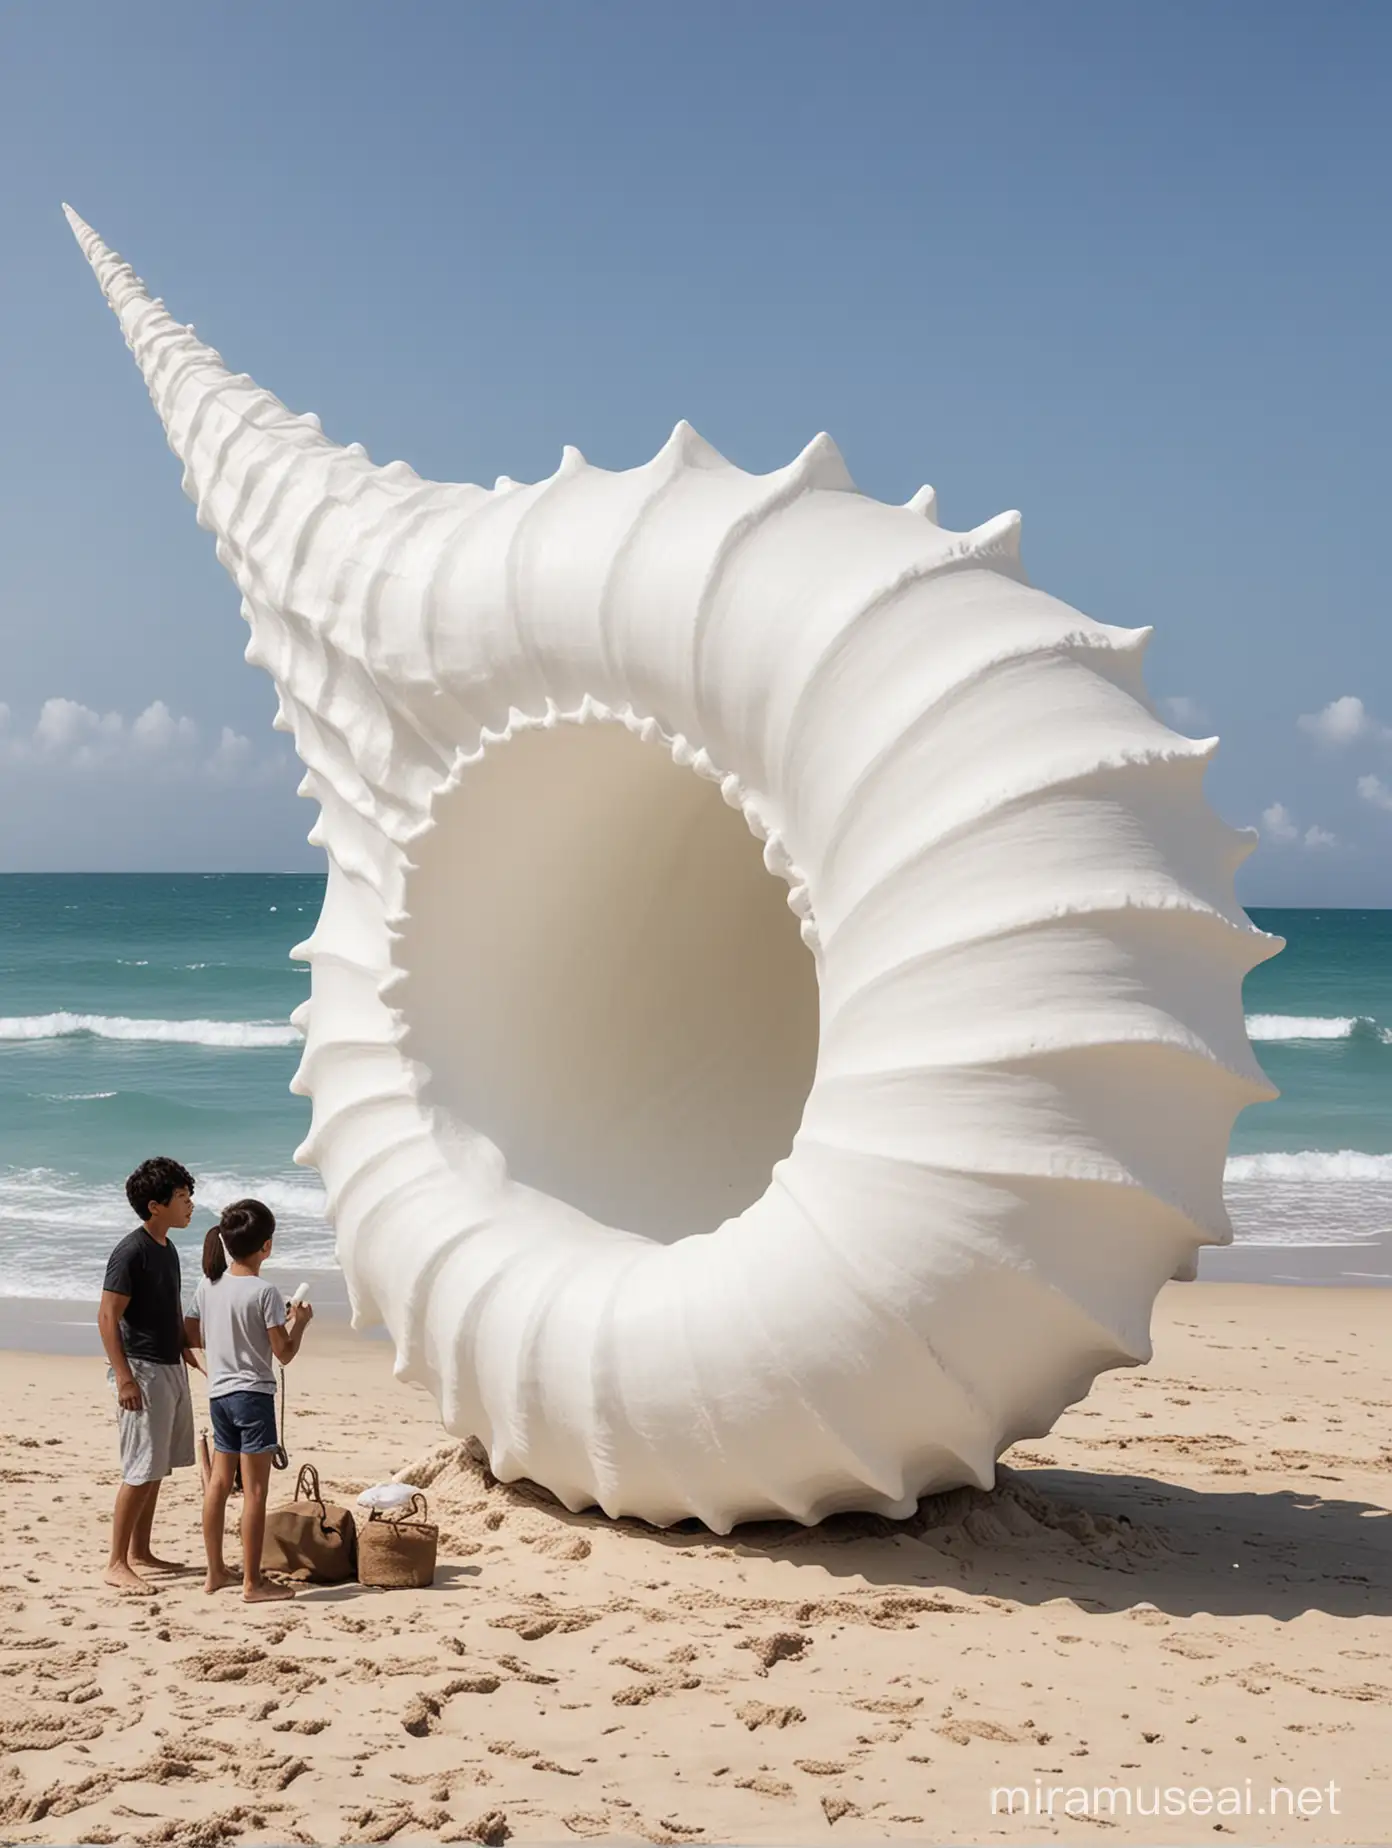 Enormous White Conch Shell Sculpture on Pristine Beach with People Nearby